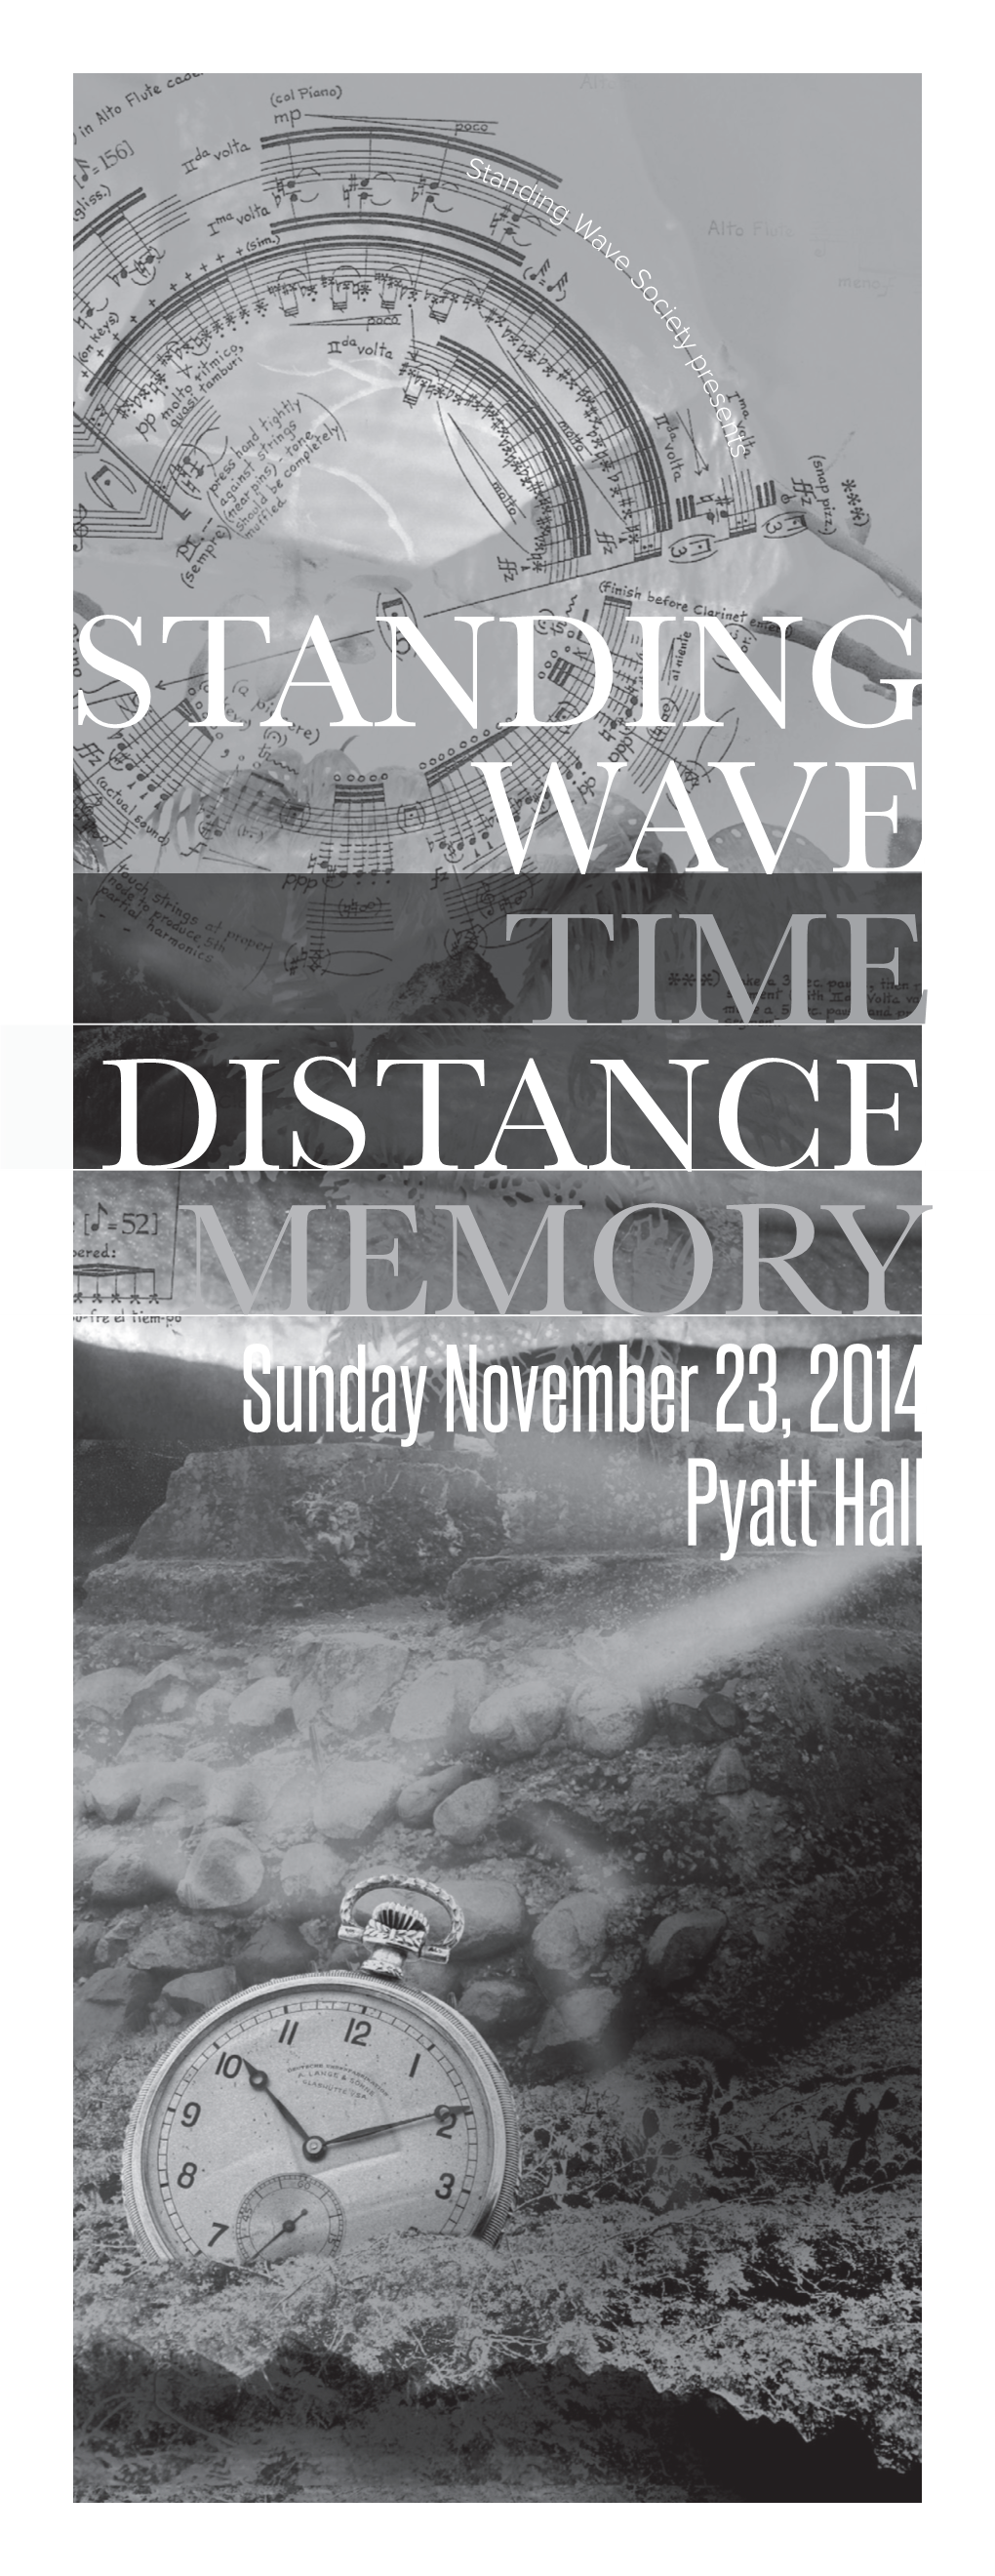 STANDING WAVE TIME DISTANCE MEMORY Sunday November 23, 2014 Pyatt Hall Welcome to Time Distance Memory, the Rst Concert of Standing Wave’S Exciting 2014-2015 Season